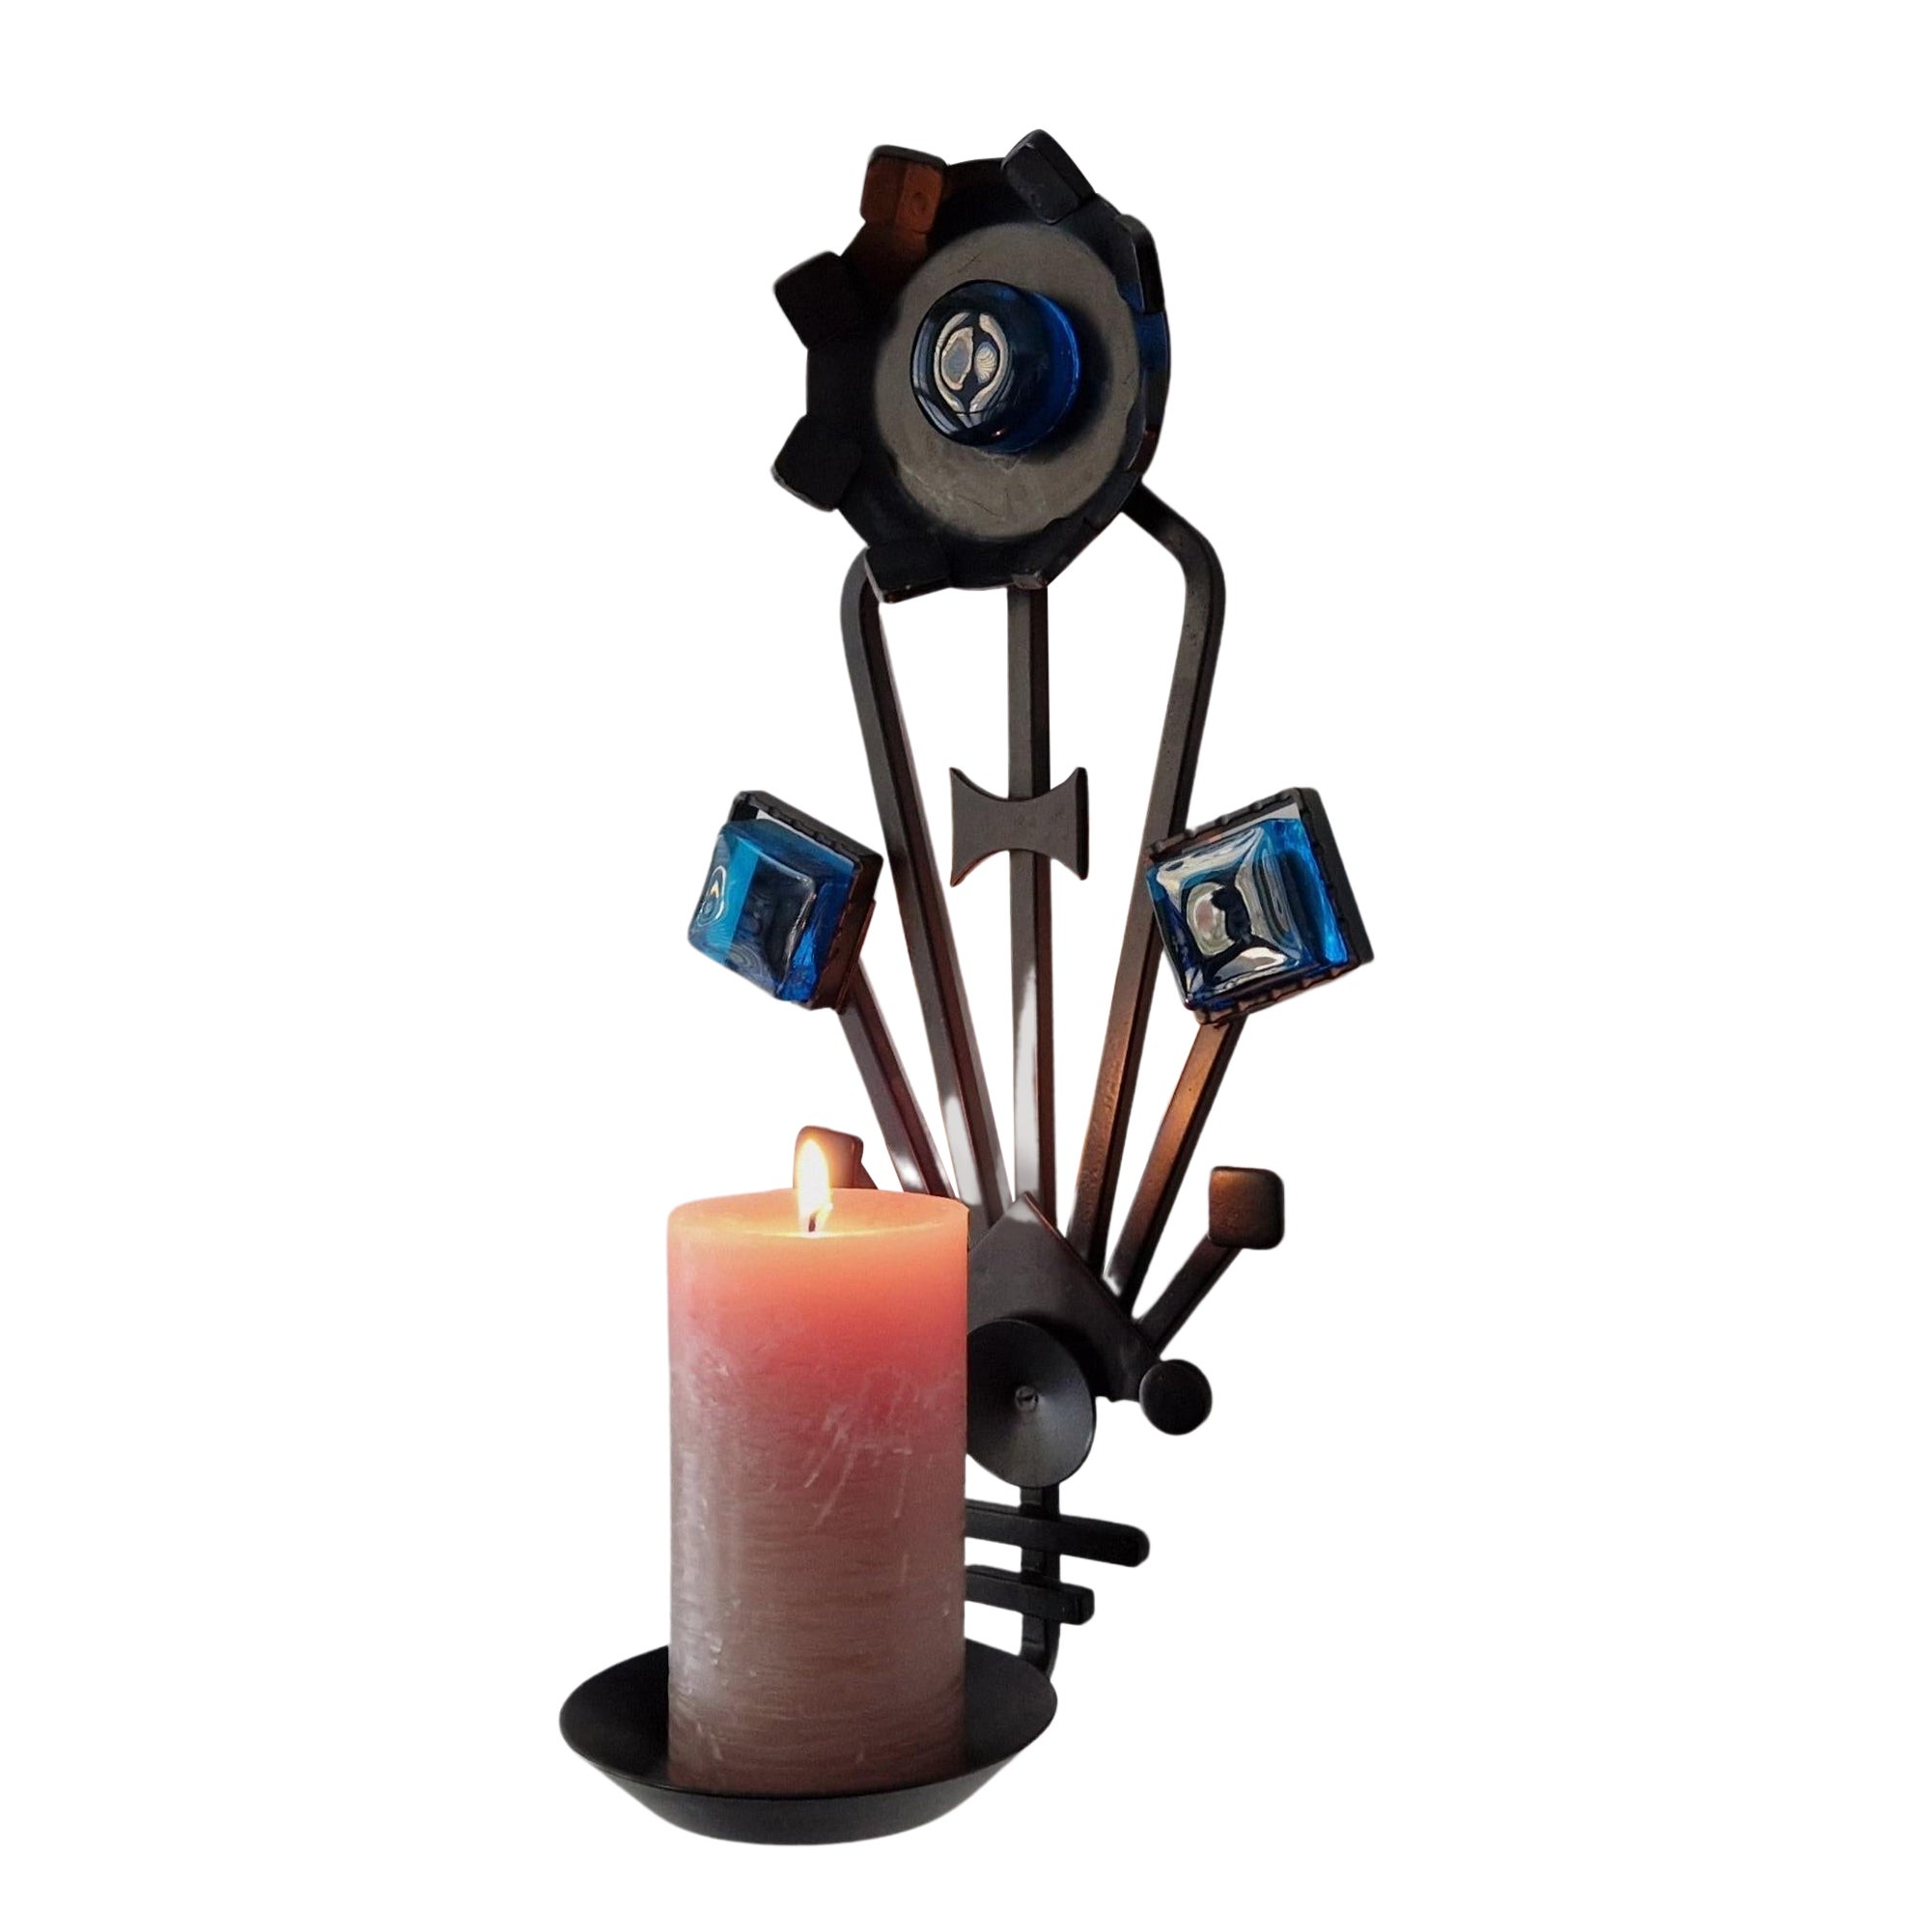 Sculptural Iron and blue glass candle sconce for Dantoft, Denmark 1960's/1970's